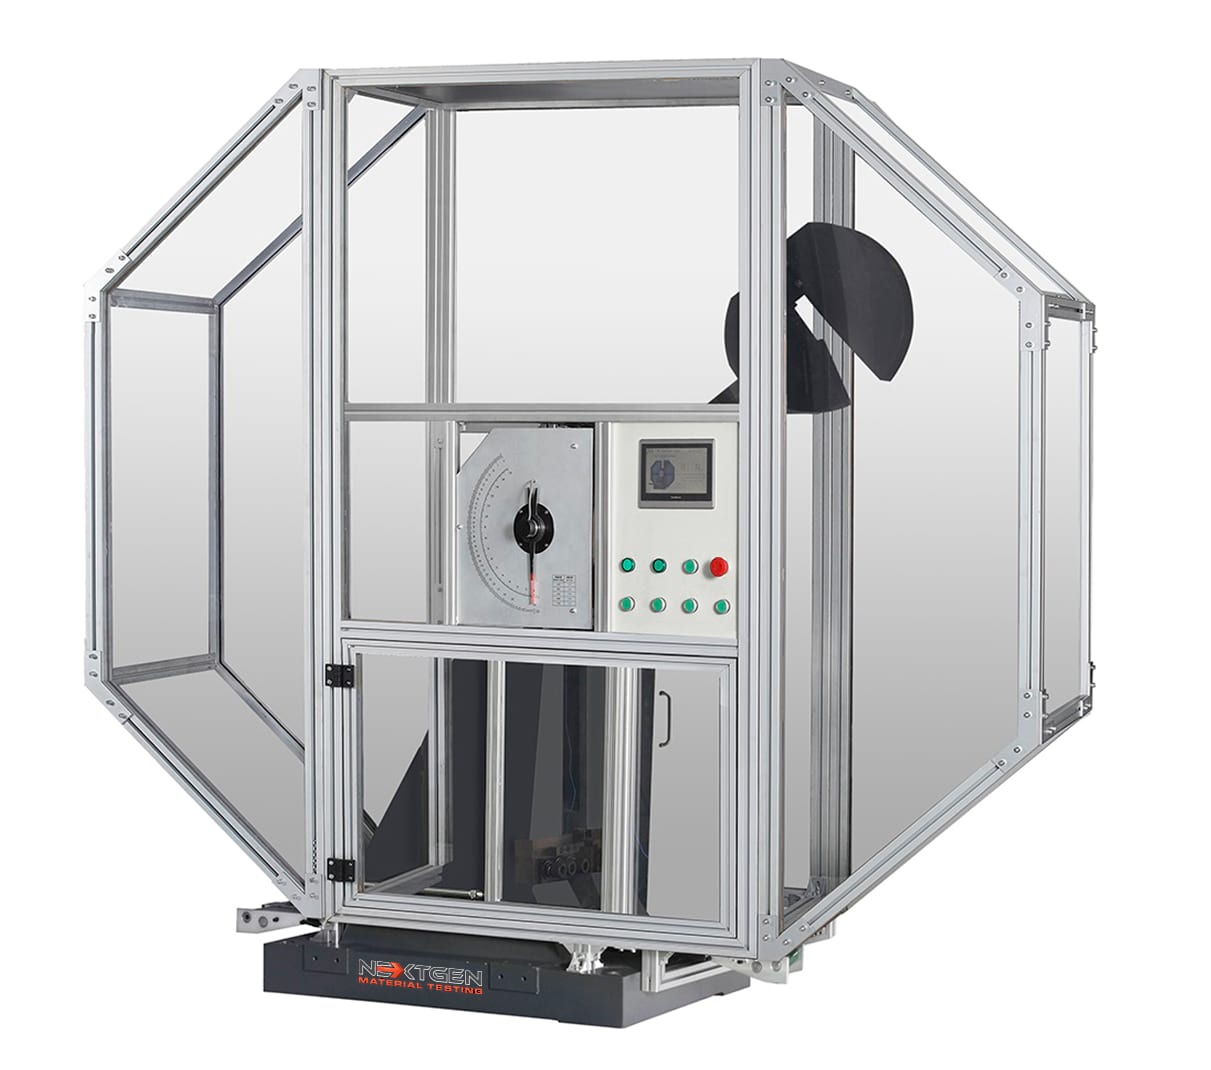 Fully shielded Charpy impact tester with automatic cooling and automatic specimen feeding system. Class H impact testing system